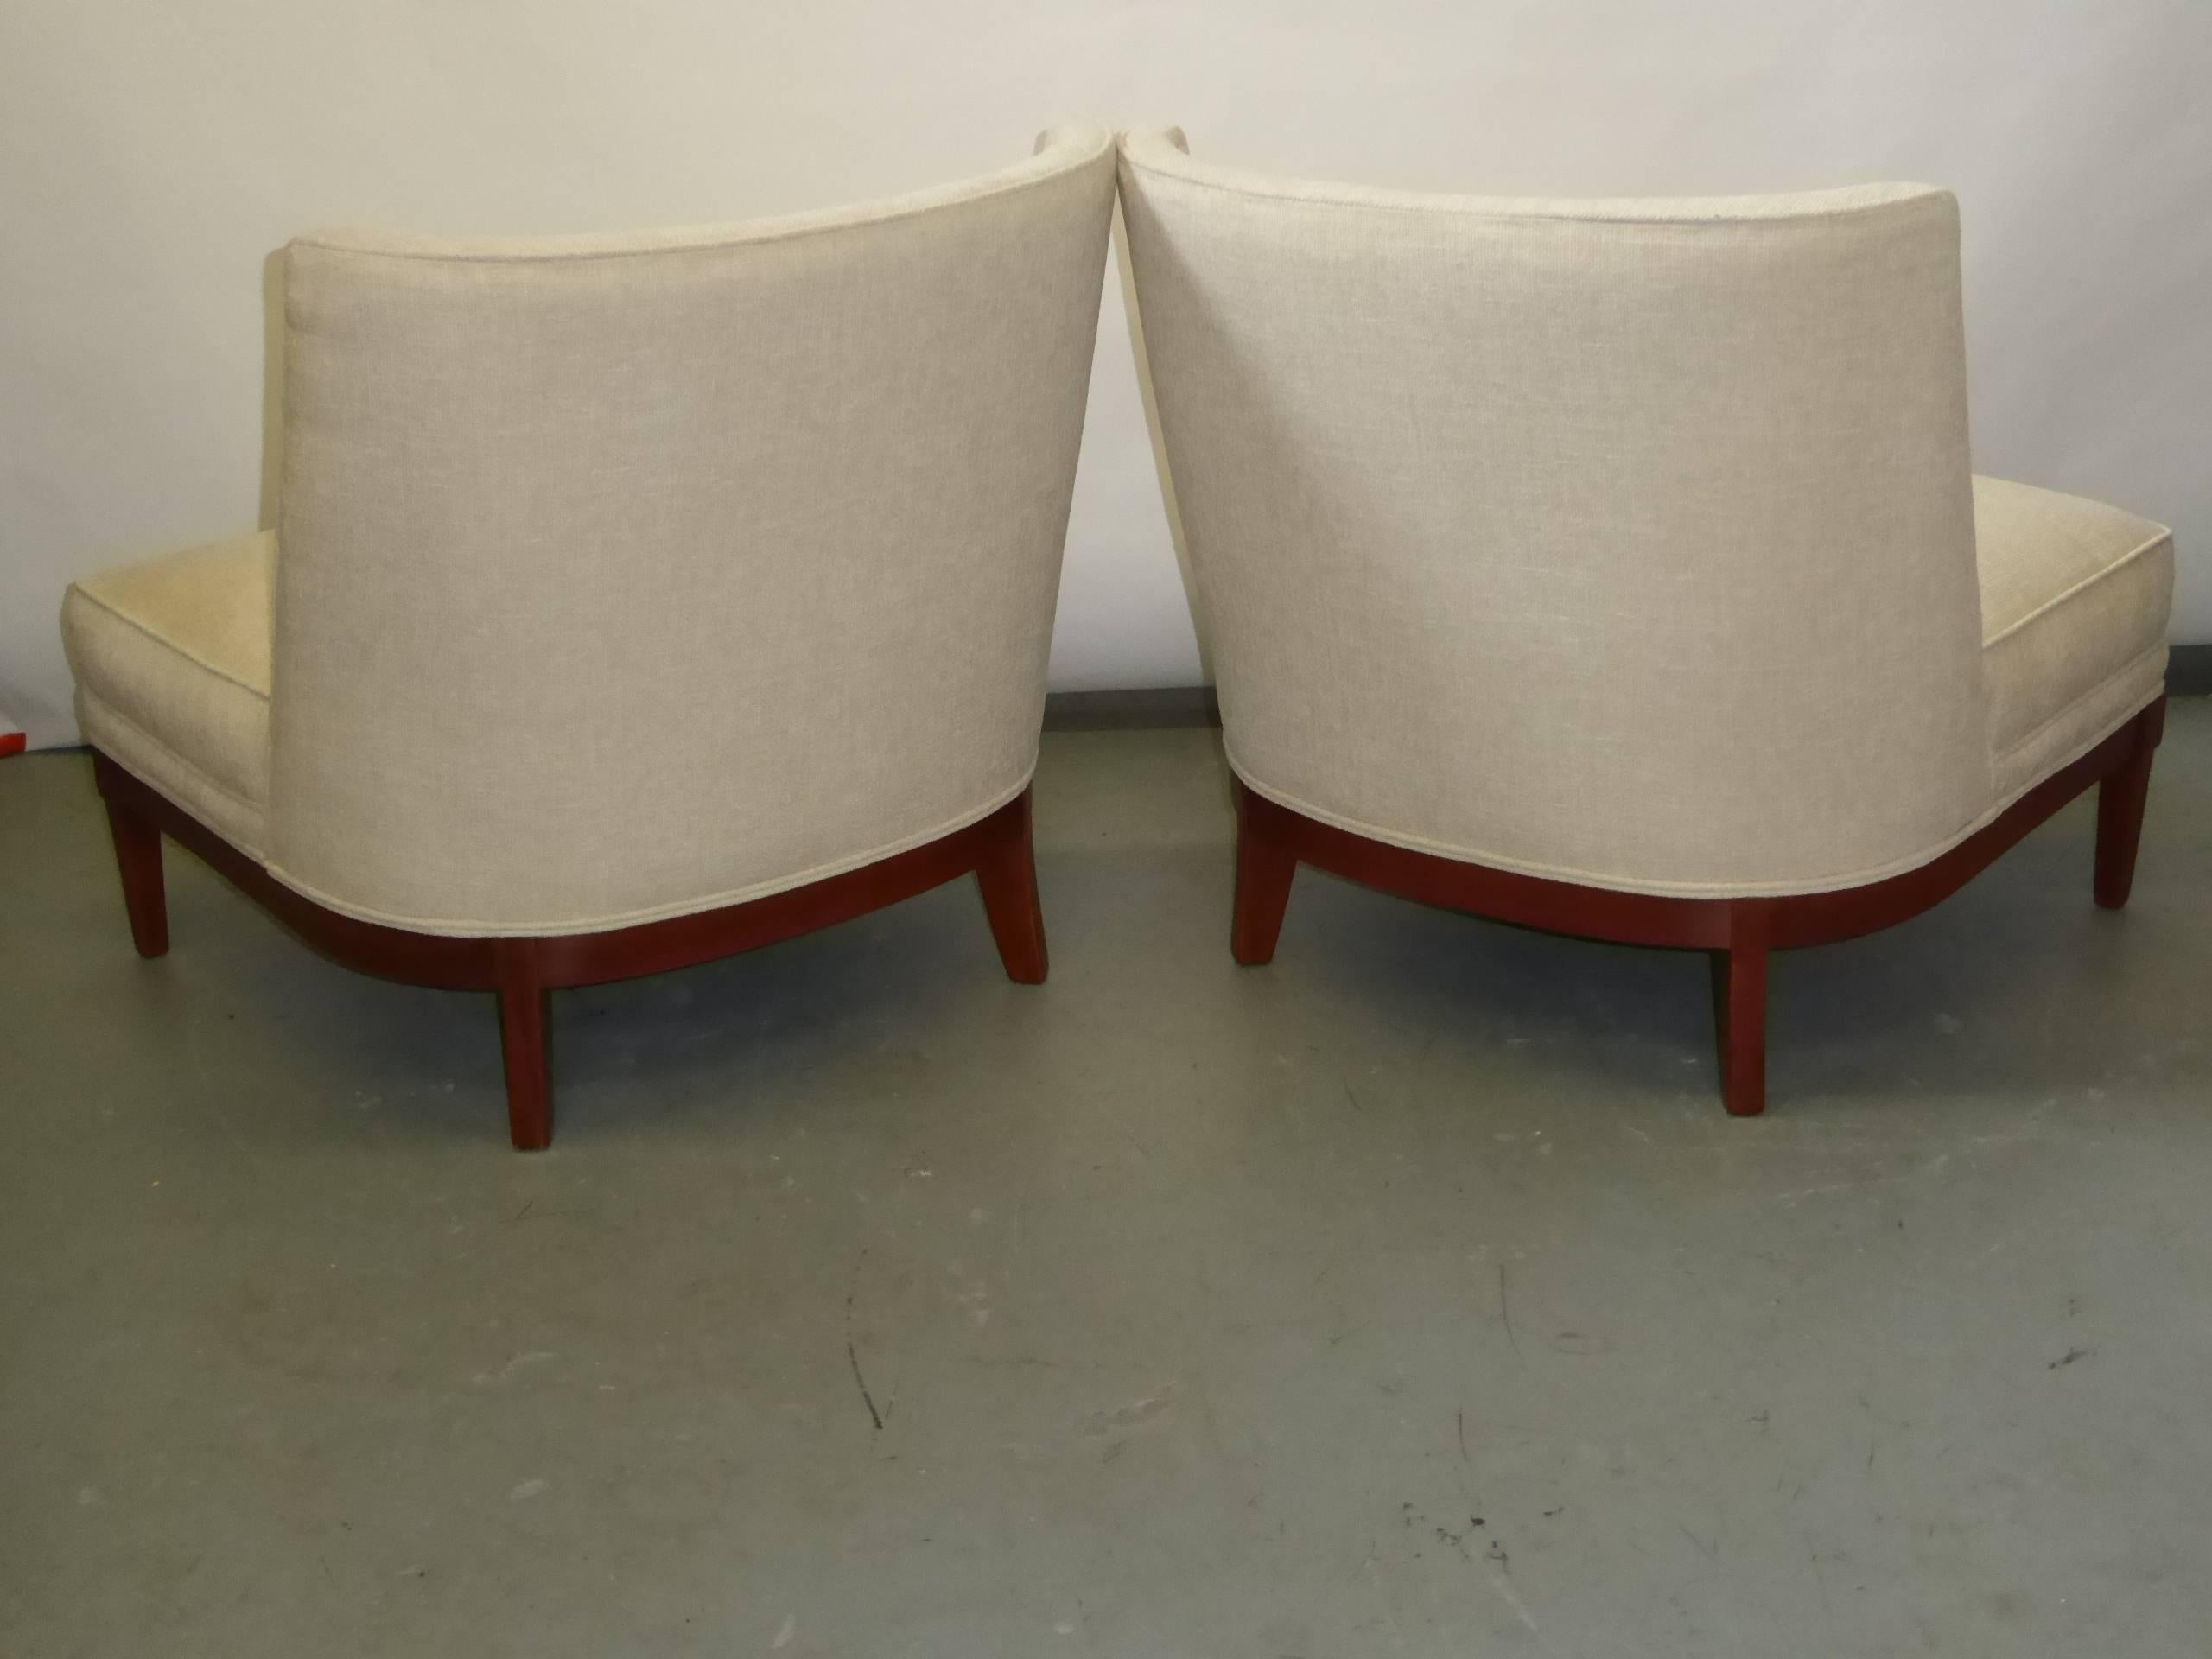  PAIR Sophisticated 1940s Slipper Lounge Chairs 1